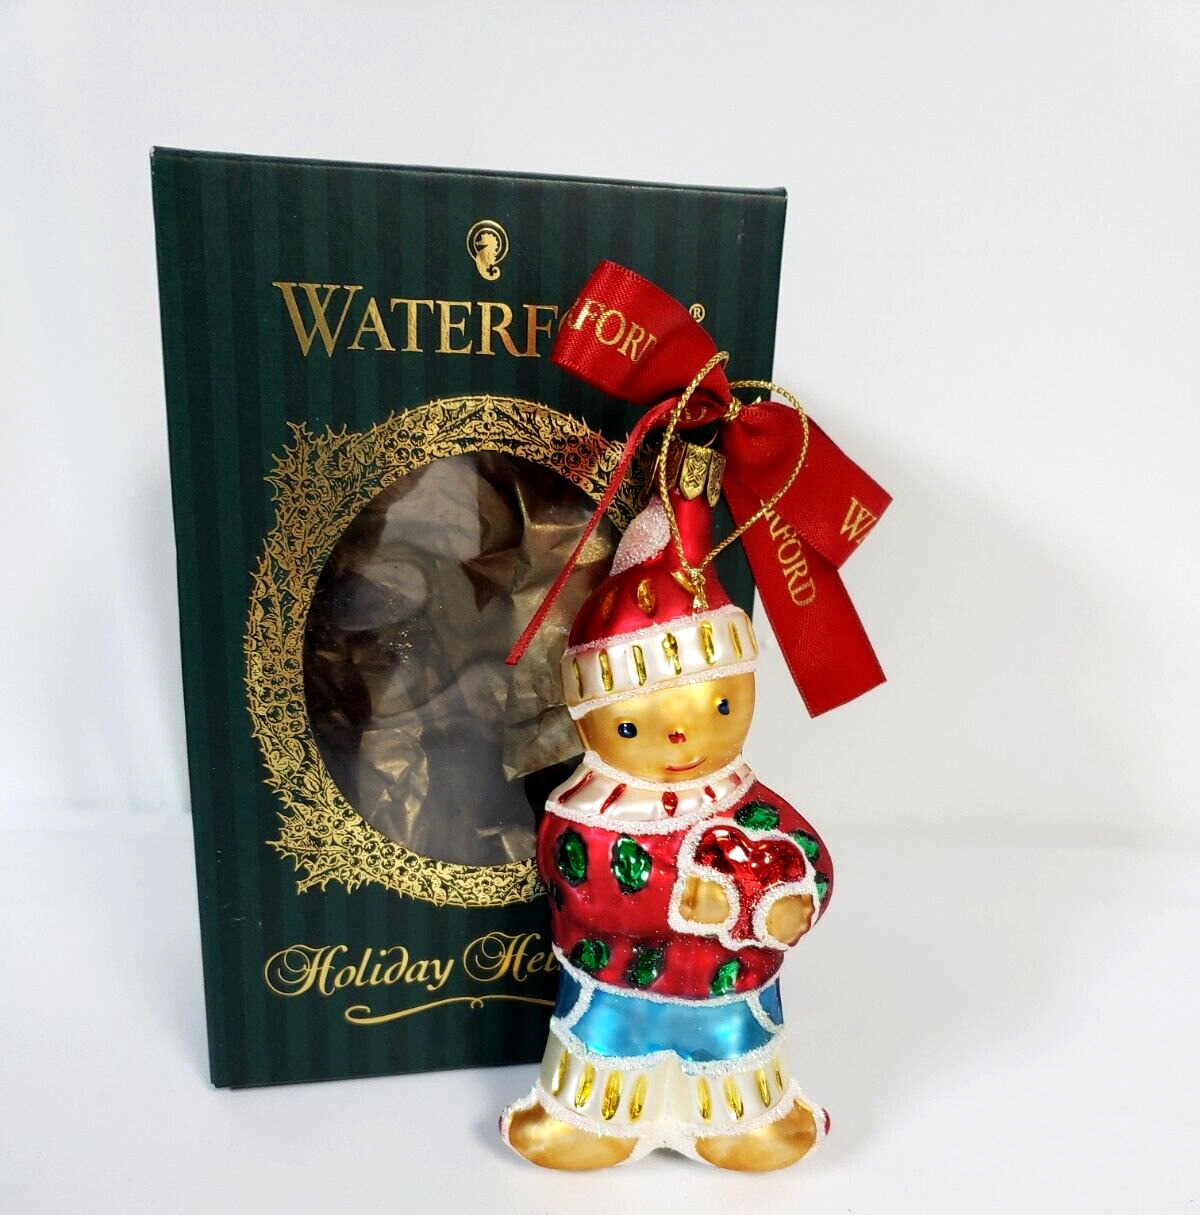 Waterford Holiday Heirlooms Ornament Christmas Gingerbread Boy 1st Edition 2001